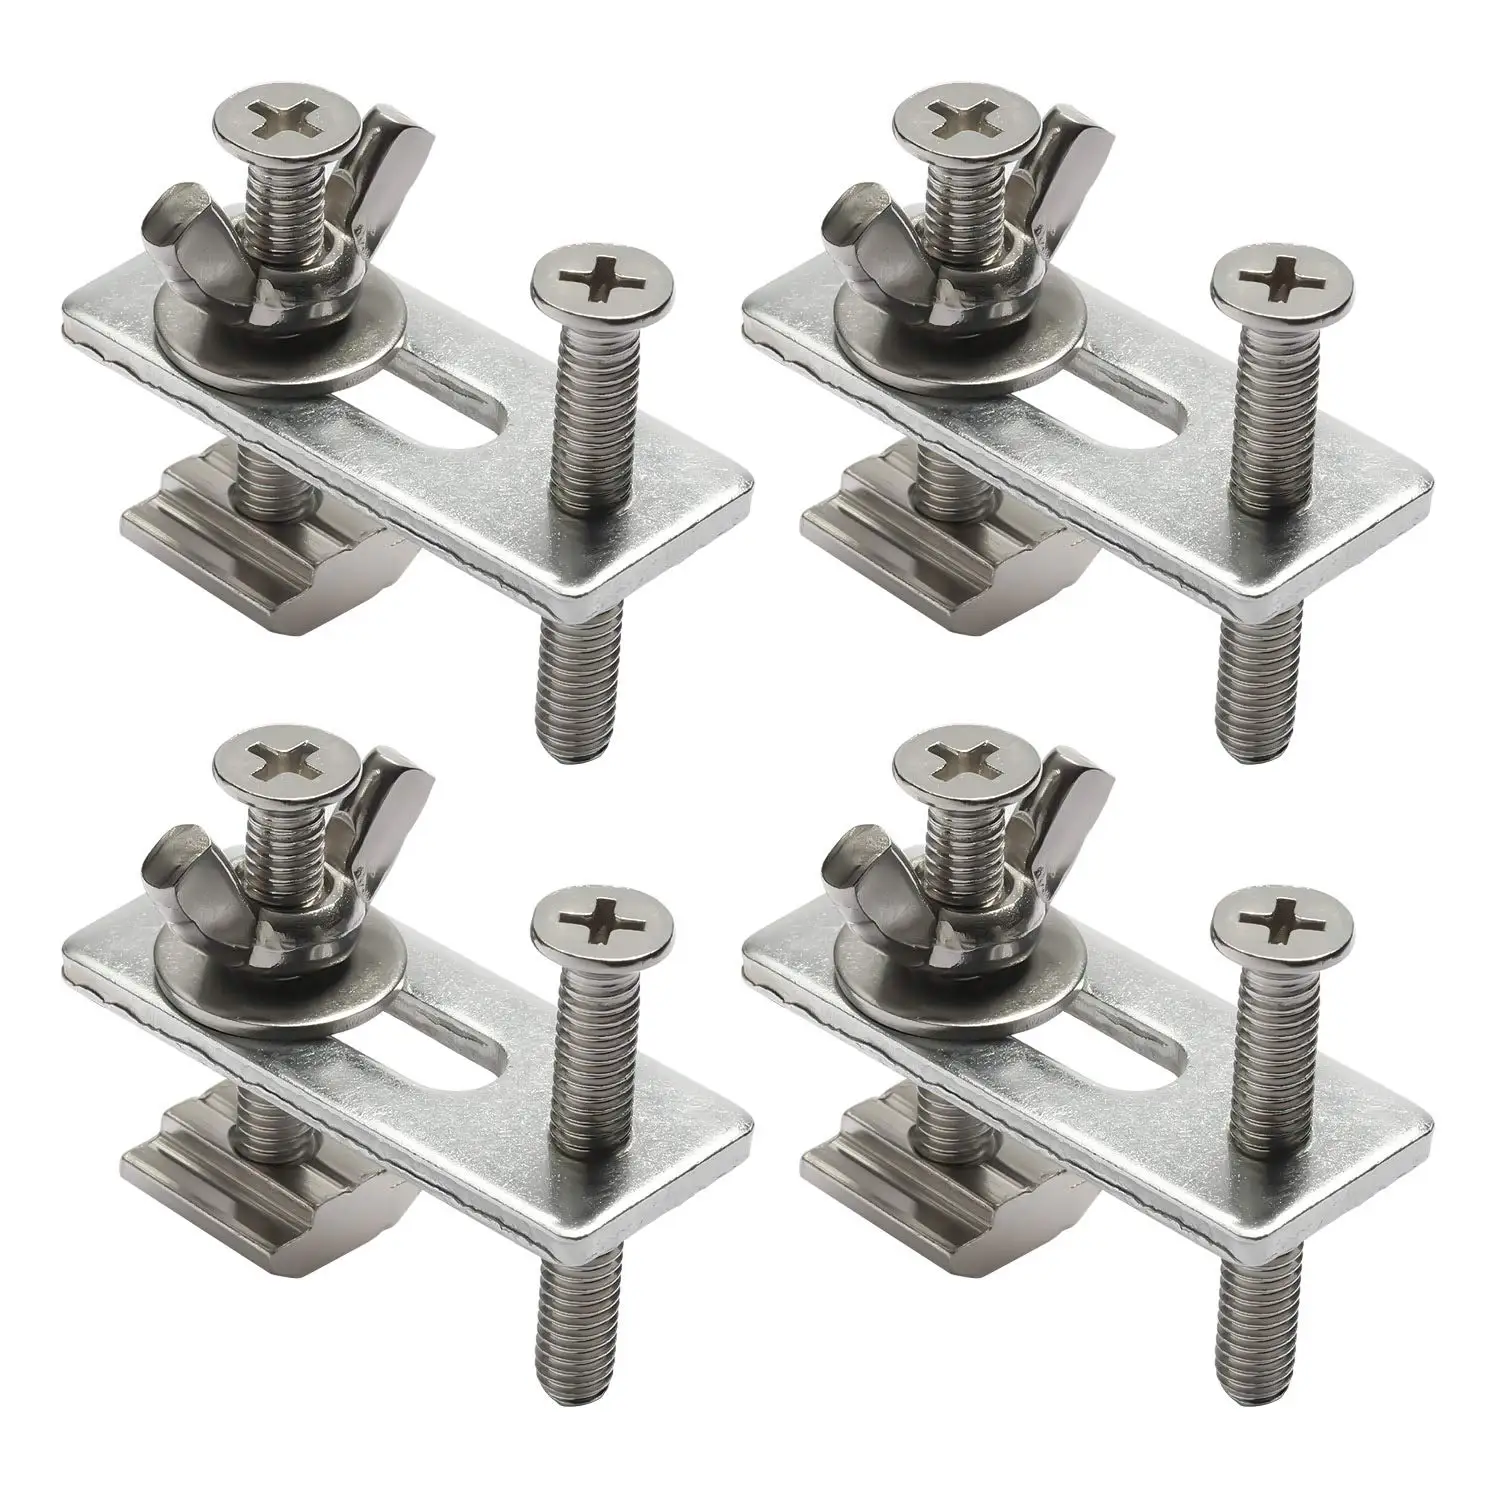 4Pcs T-Track Mini Hold Down Clamp Kit with Iron Machine Engraving Machine Plate Clamp Fixture for Cnc Engraving Machine